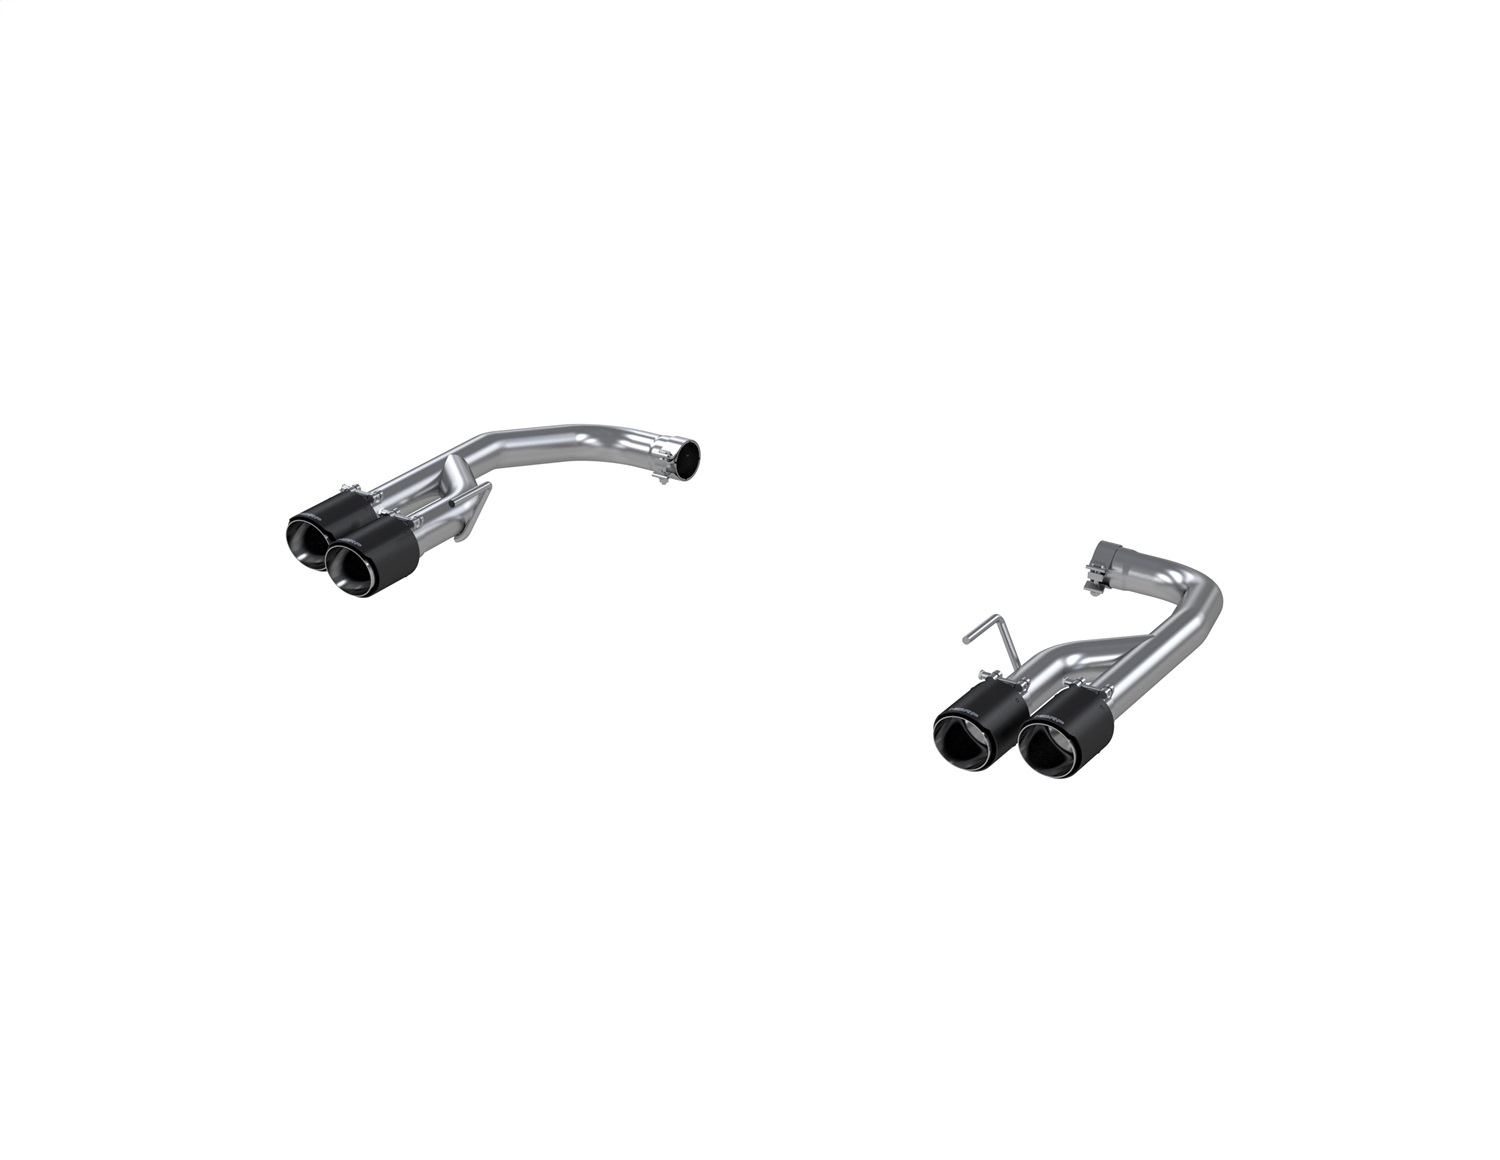 MBRP Exhaust S72113CF Armor Pro Axle Back Exhaust System Fits 18-23 Mustang